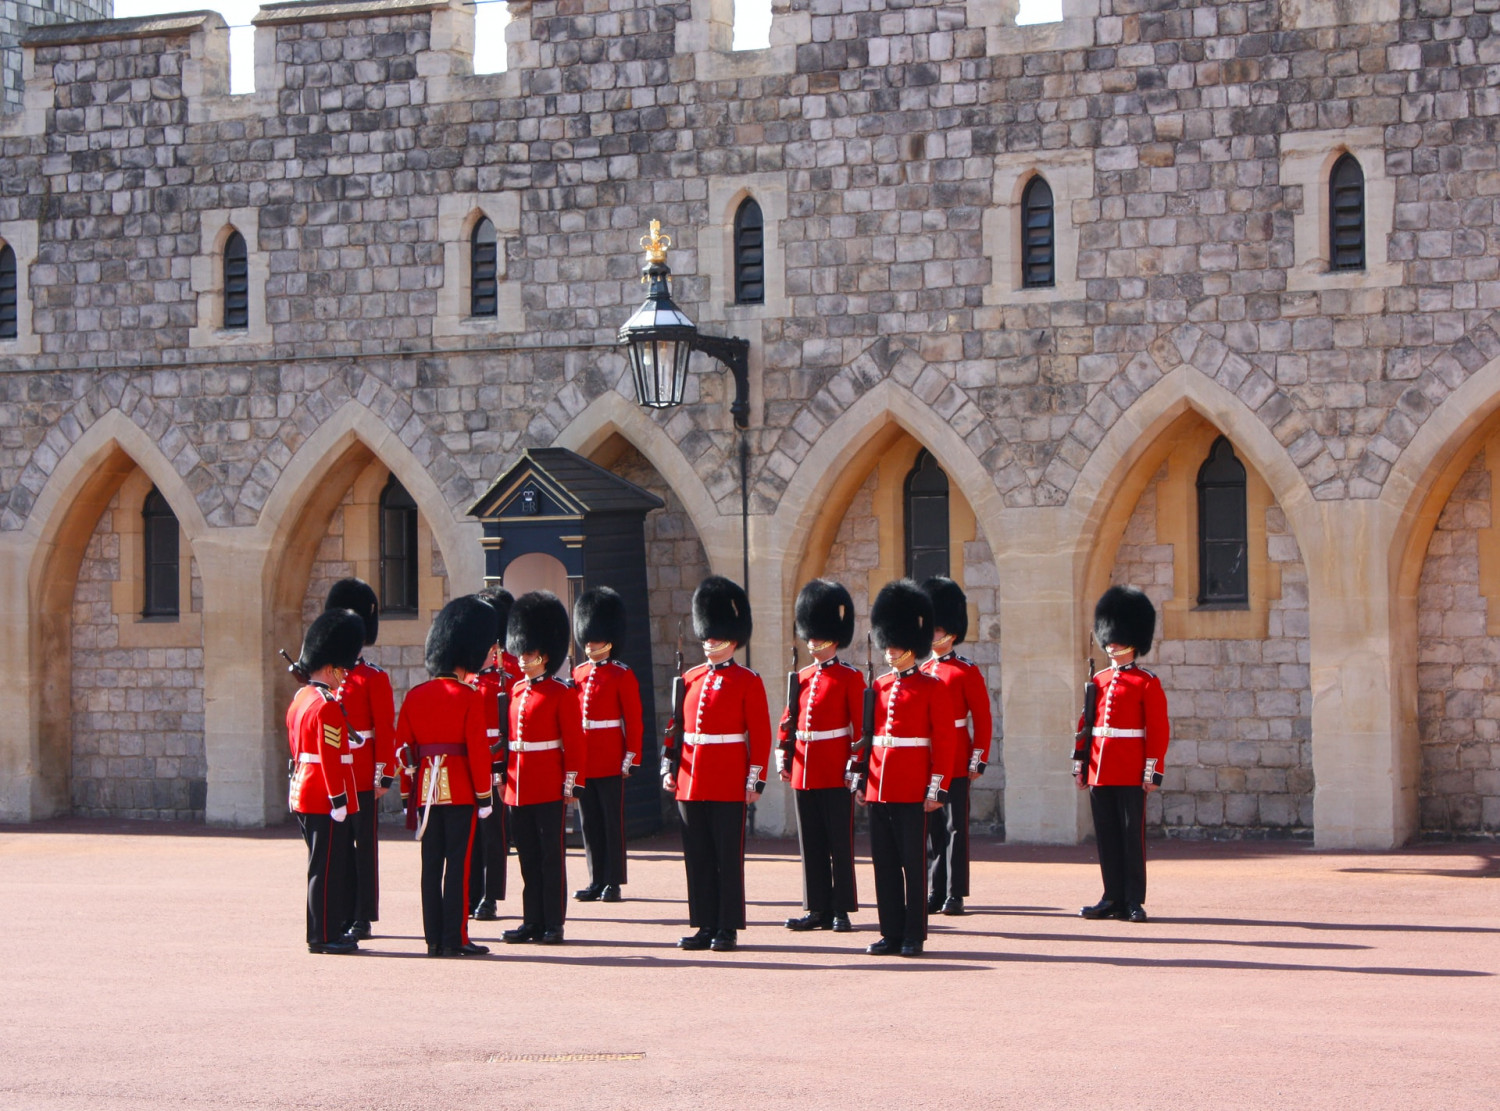 Queen's guards at Windsor Castle